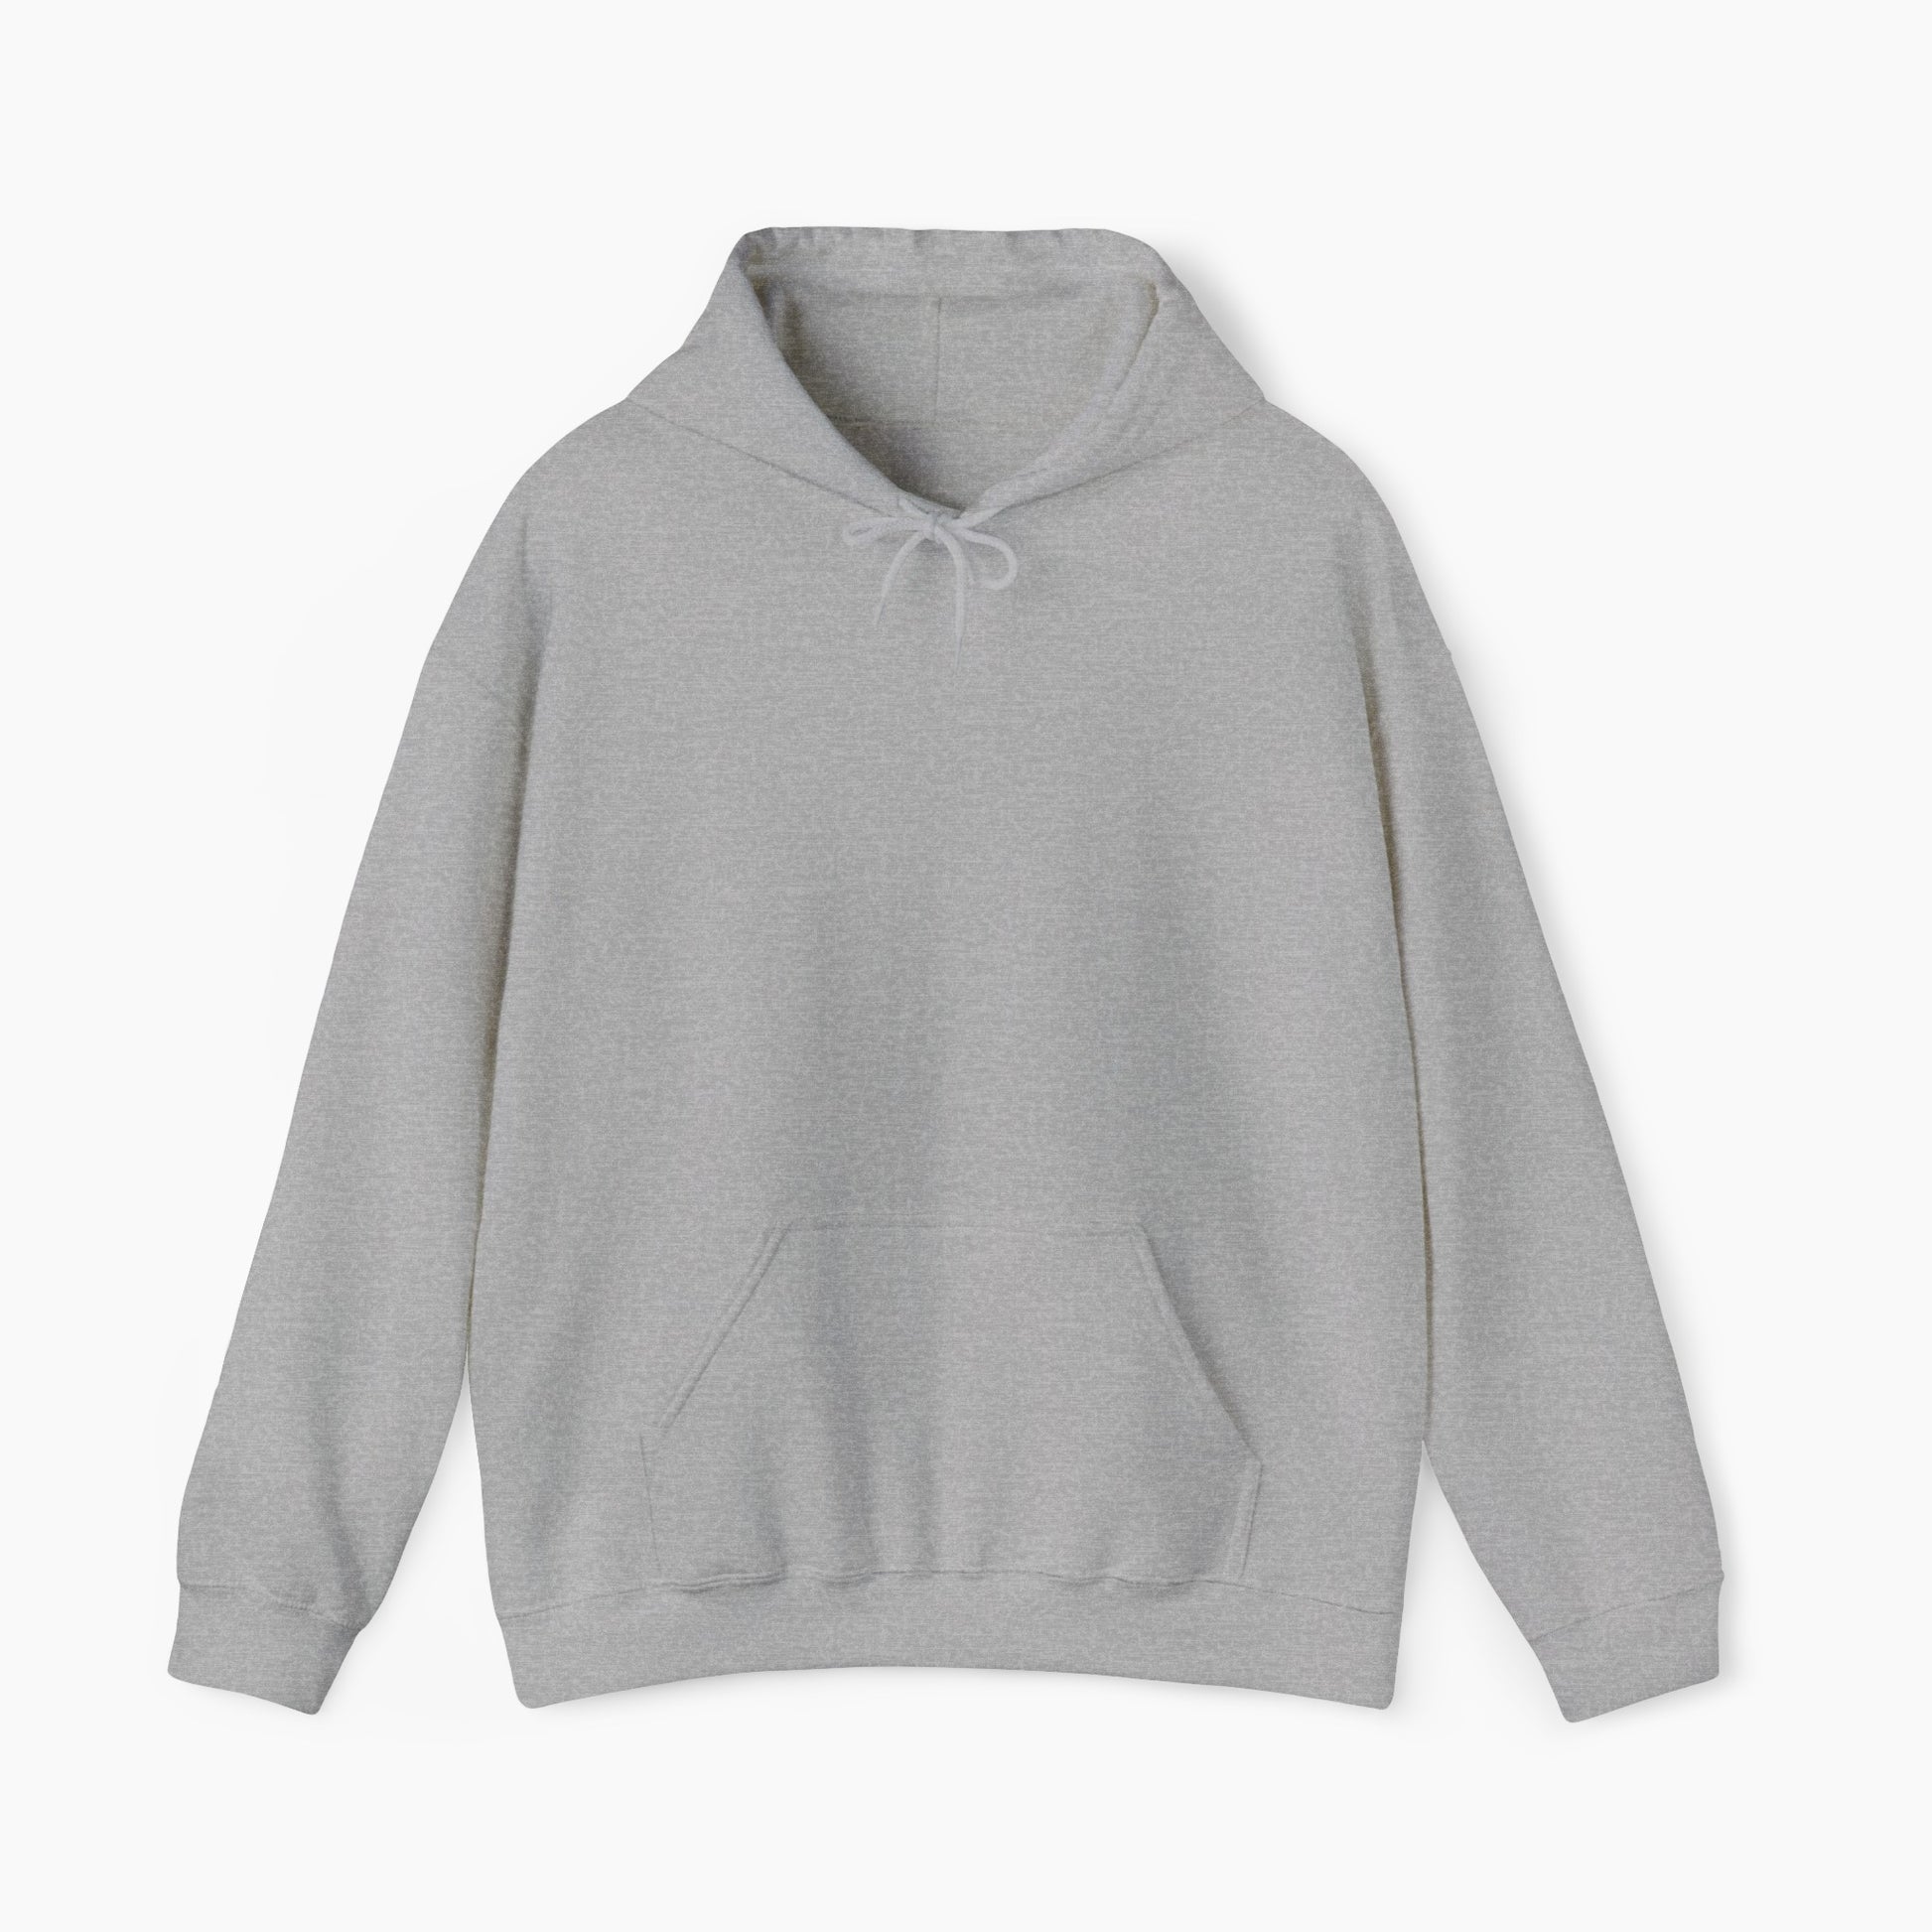 Front view of a plain light grey hoodie on a plain background.